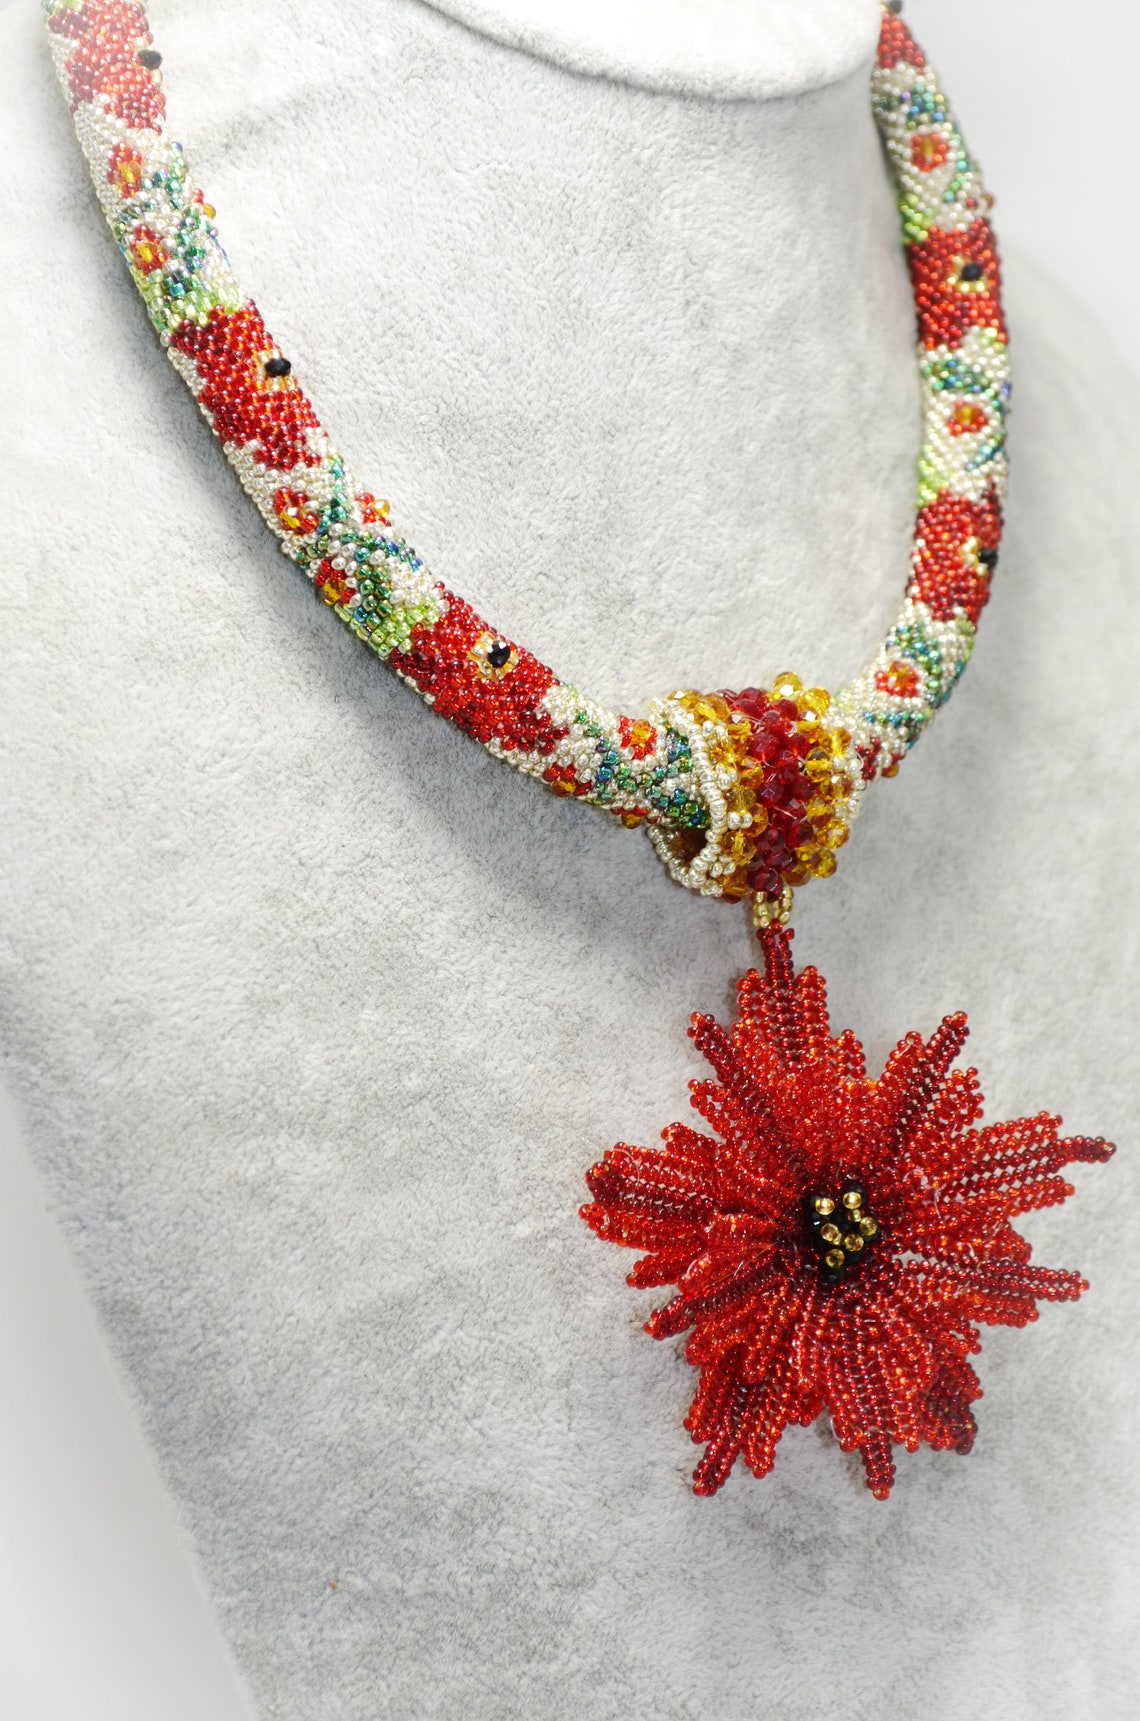 Beaded Floral Poinsettia Necklace Hand Woven Red Poinsettia | Etsy